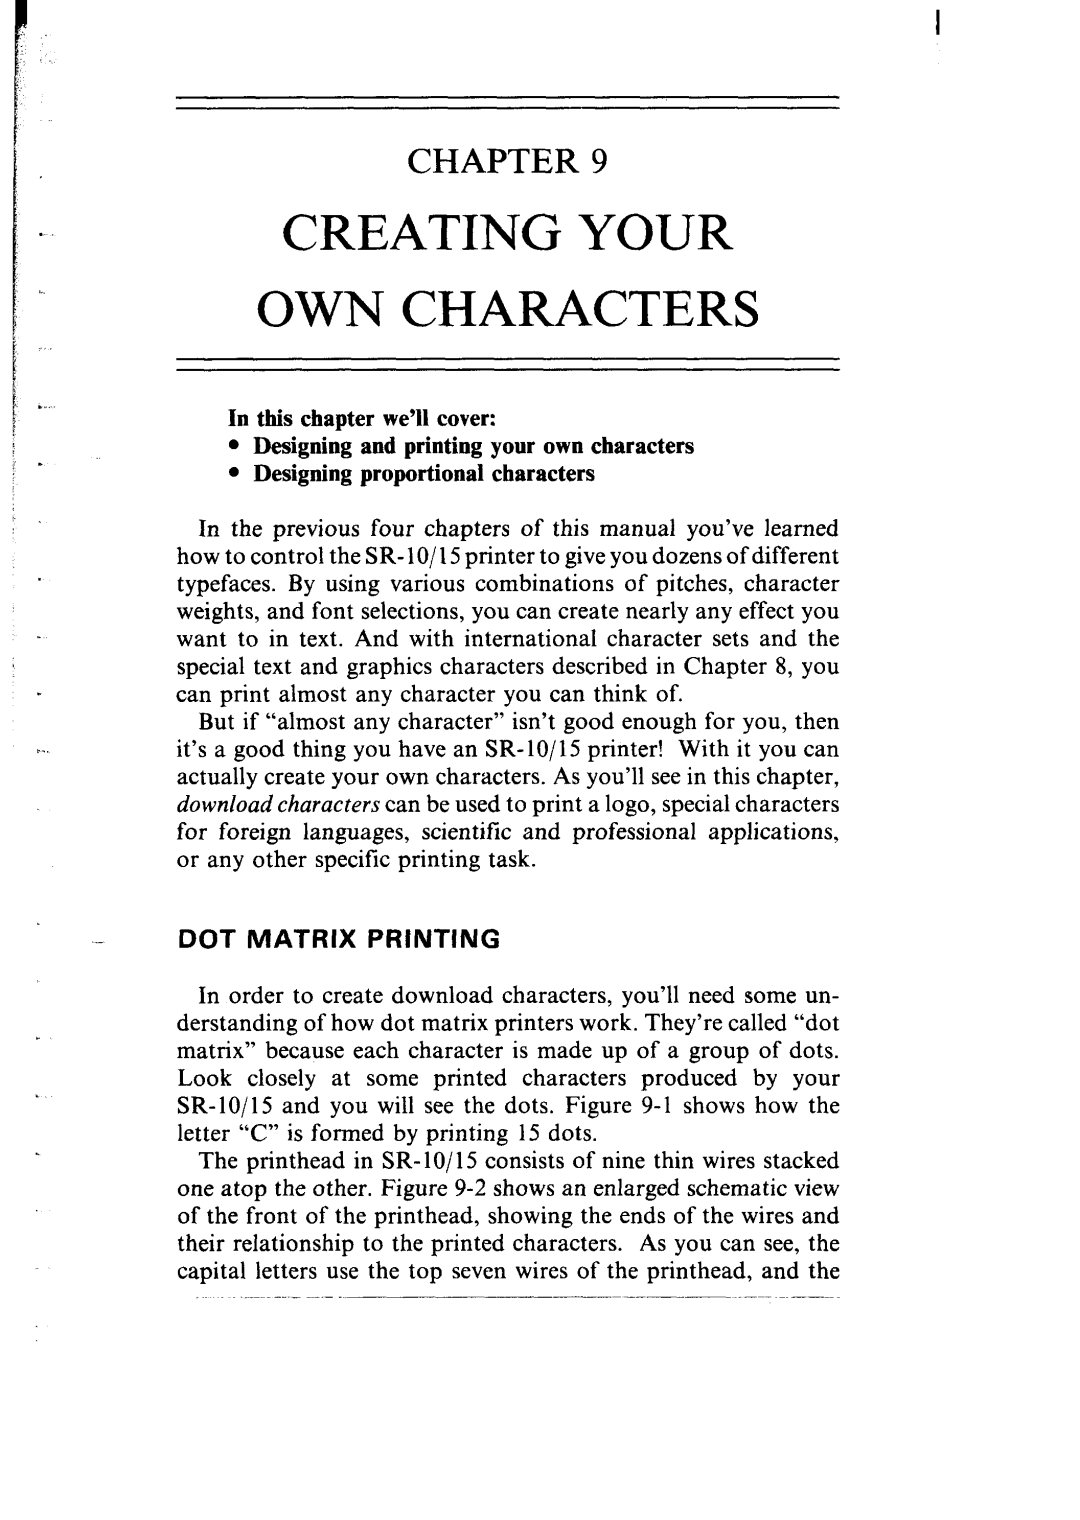 Star Micronics SR-10/I5 Creating Your Own Characters, In this chapter we’ll cover, Designing proportional characters 